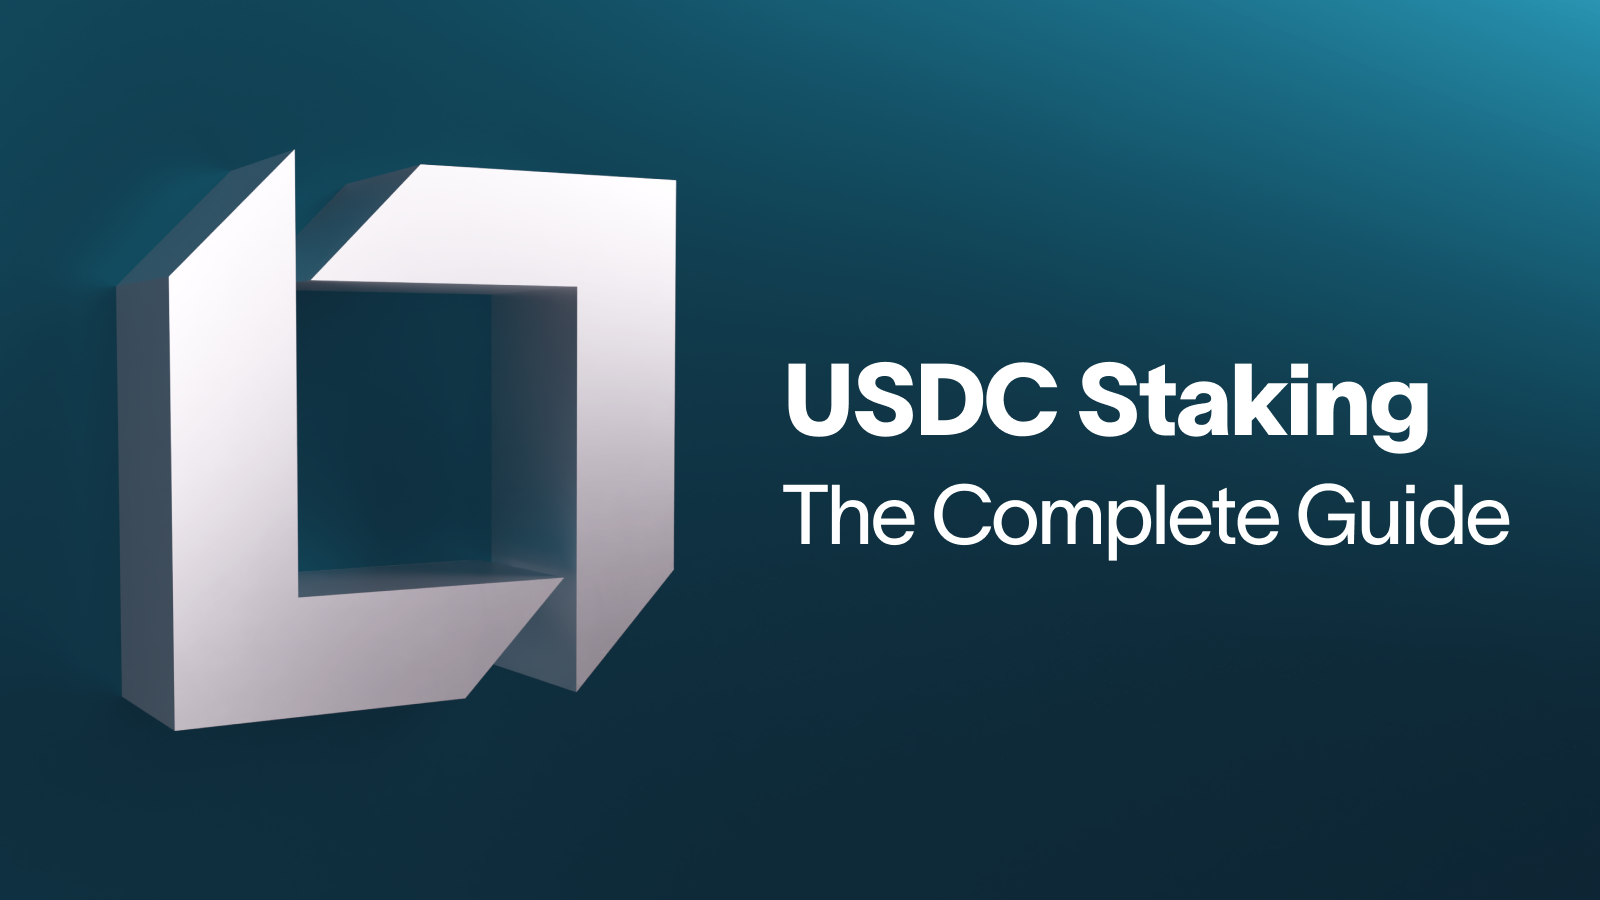 USDC Staking - The Complete Guide